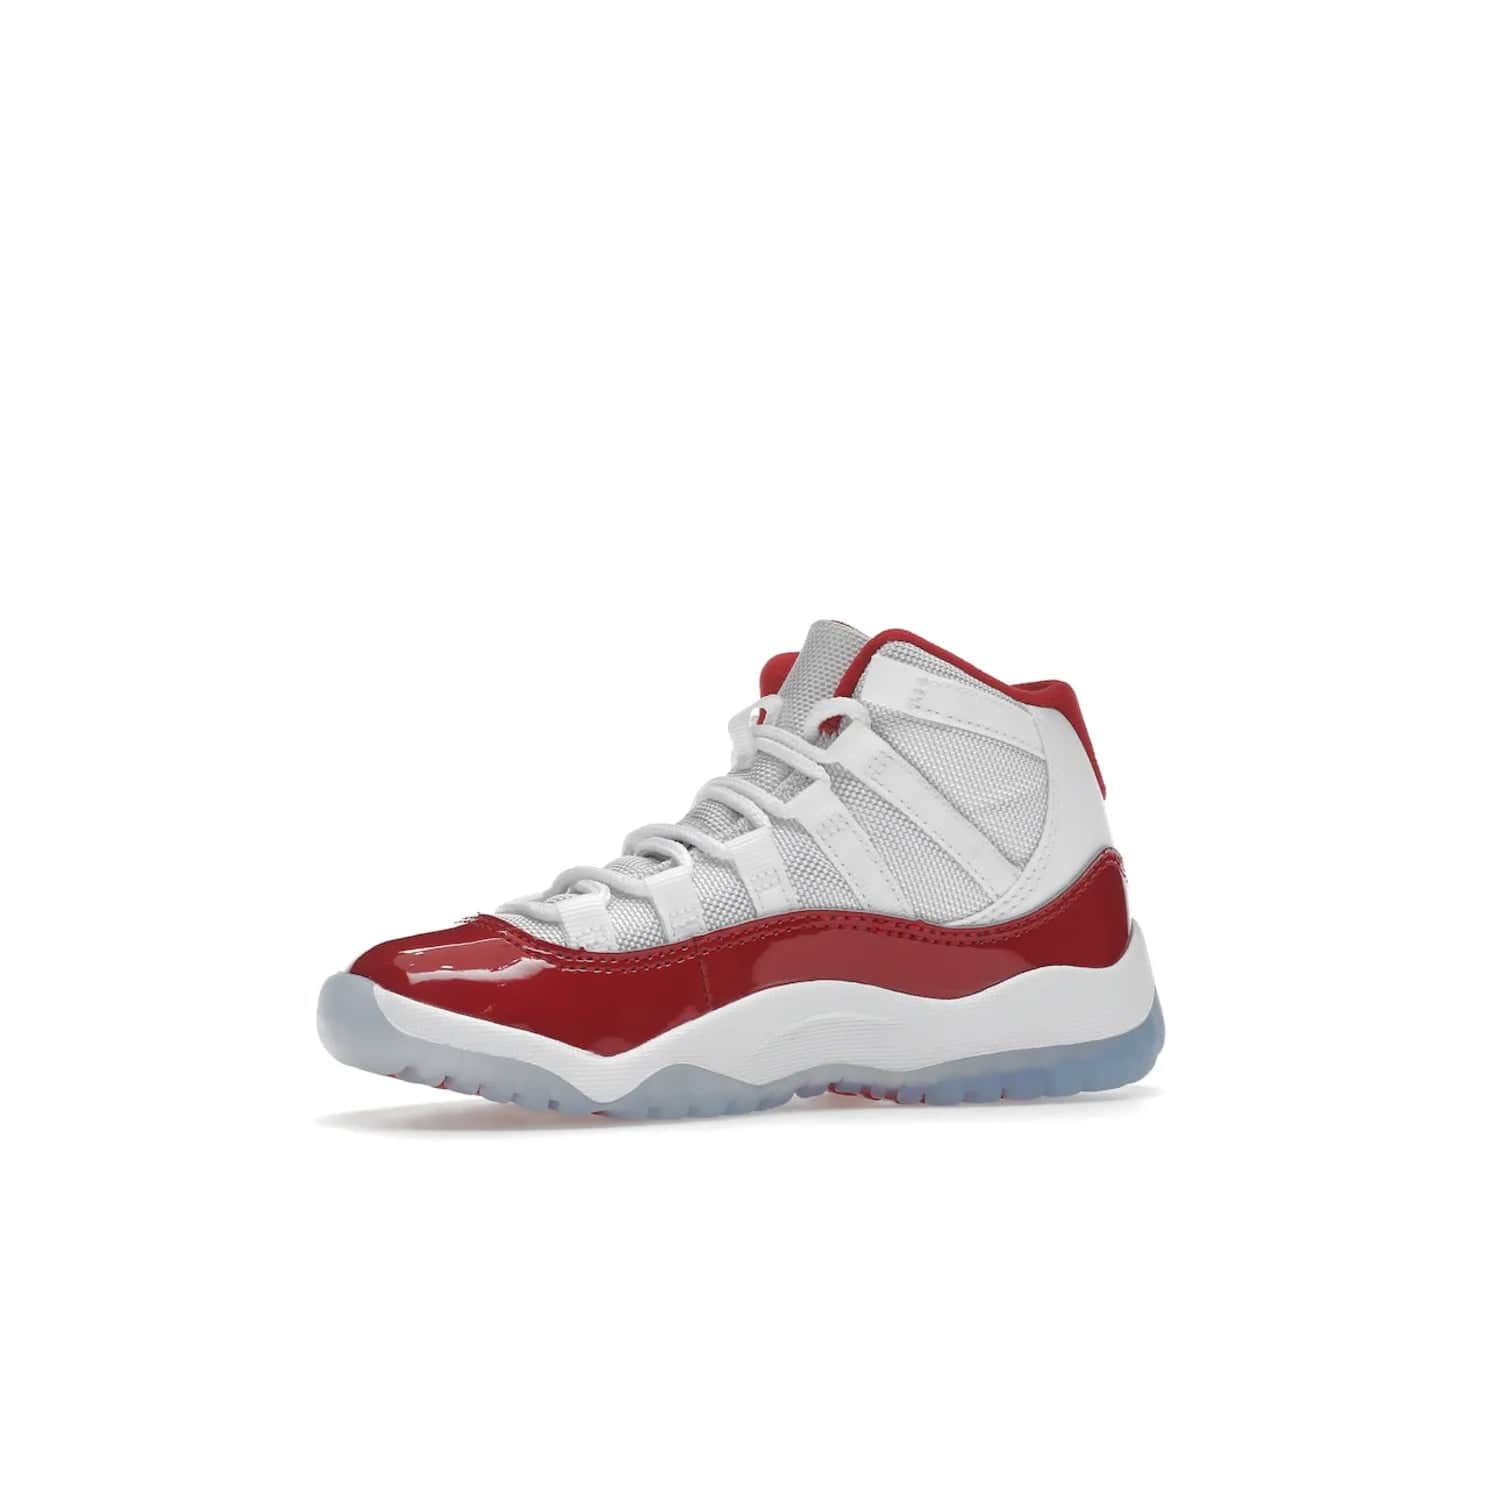 Jordan 11 Retro Cherry (2022) (PS) - Image 17 - Only at www.BallersClubKickz.com - An iconic silhouette with a timeless look, the Air Jordan 11 Retro Cherry 2022 PS features a crisp White, Varsity Red and Black colorway. The upper is made of ballistic mesh, a red patent leather mudguard, '23' branding and white Phylon midsole. Get optimal cushioning and comfort on December 10th, 2022. Don't miss out.